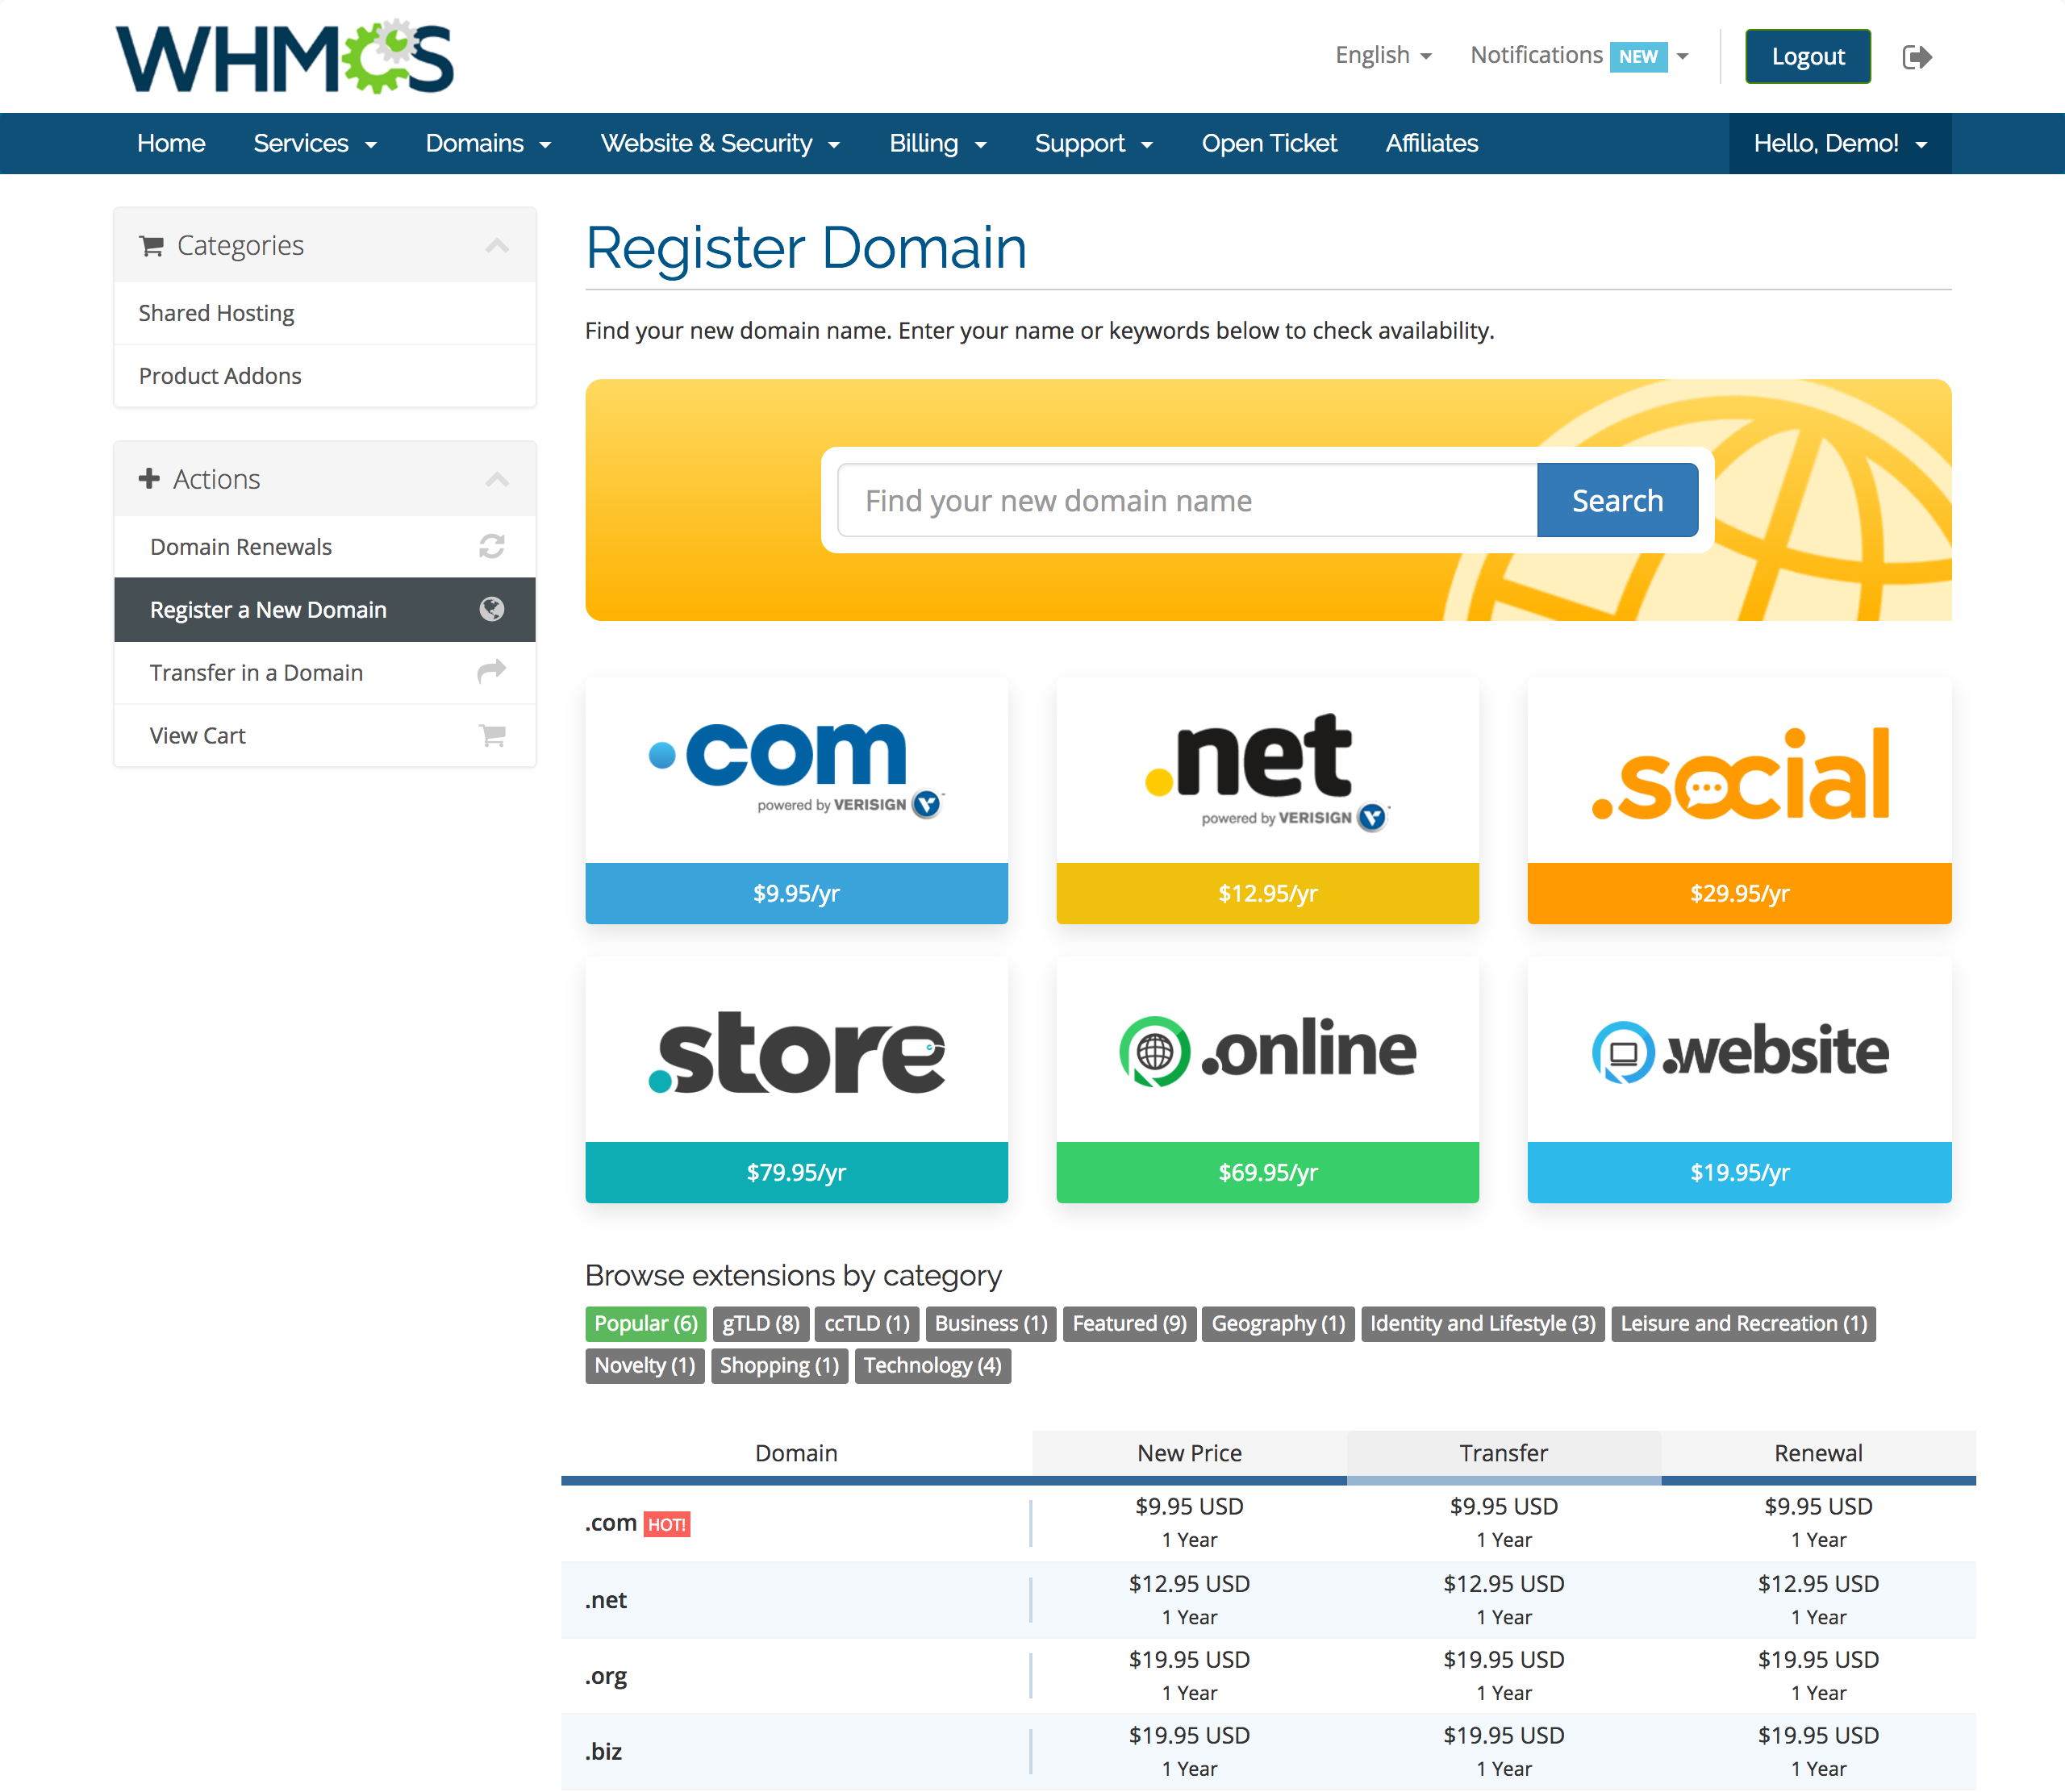 Domain registration in the WHMCS Client Area